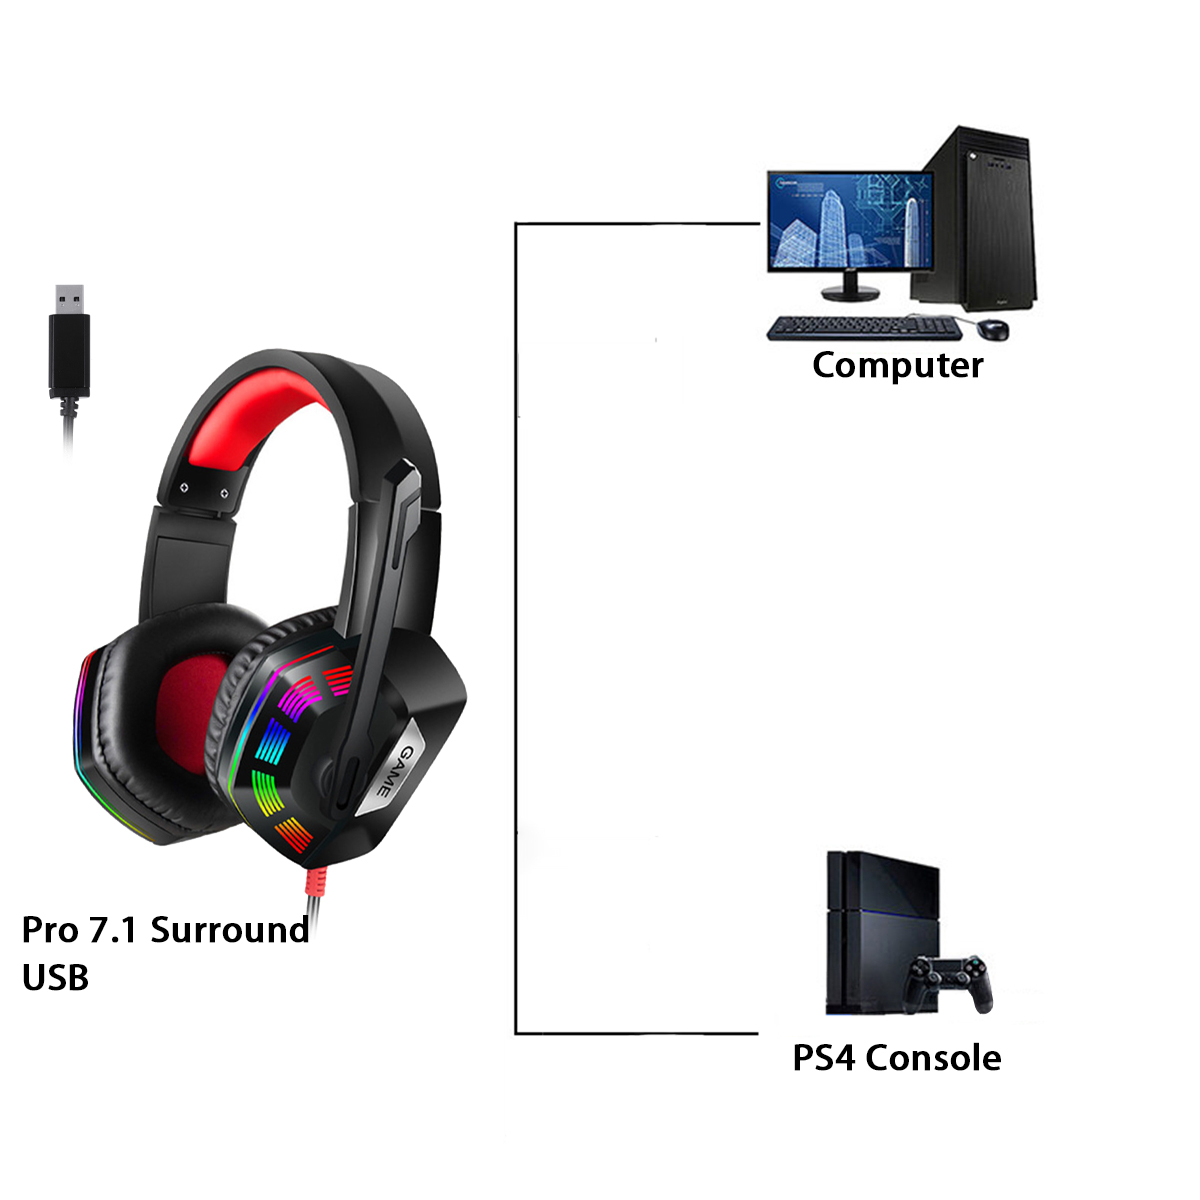 M1-Gaming-Headset-Surround-Sound-Music-Earphones-USB-71--35mm-Wired-RGB-Backlight-Game-Headphones-wi-1827492-11